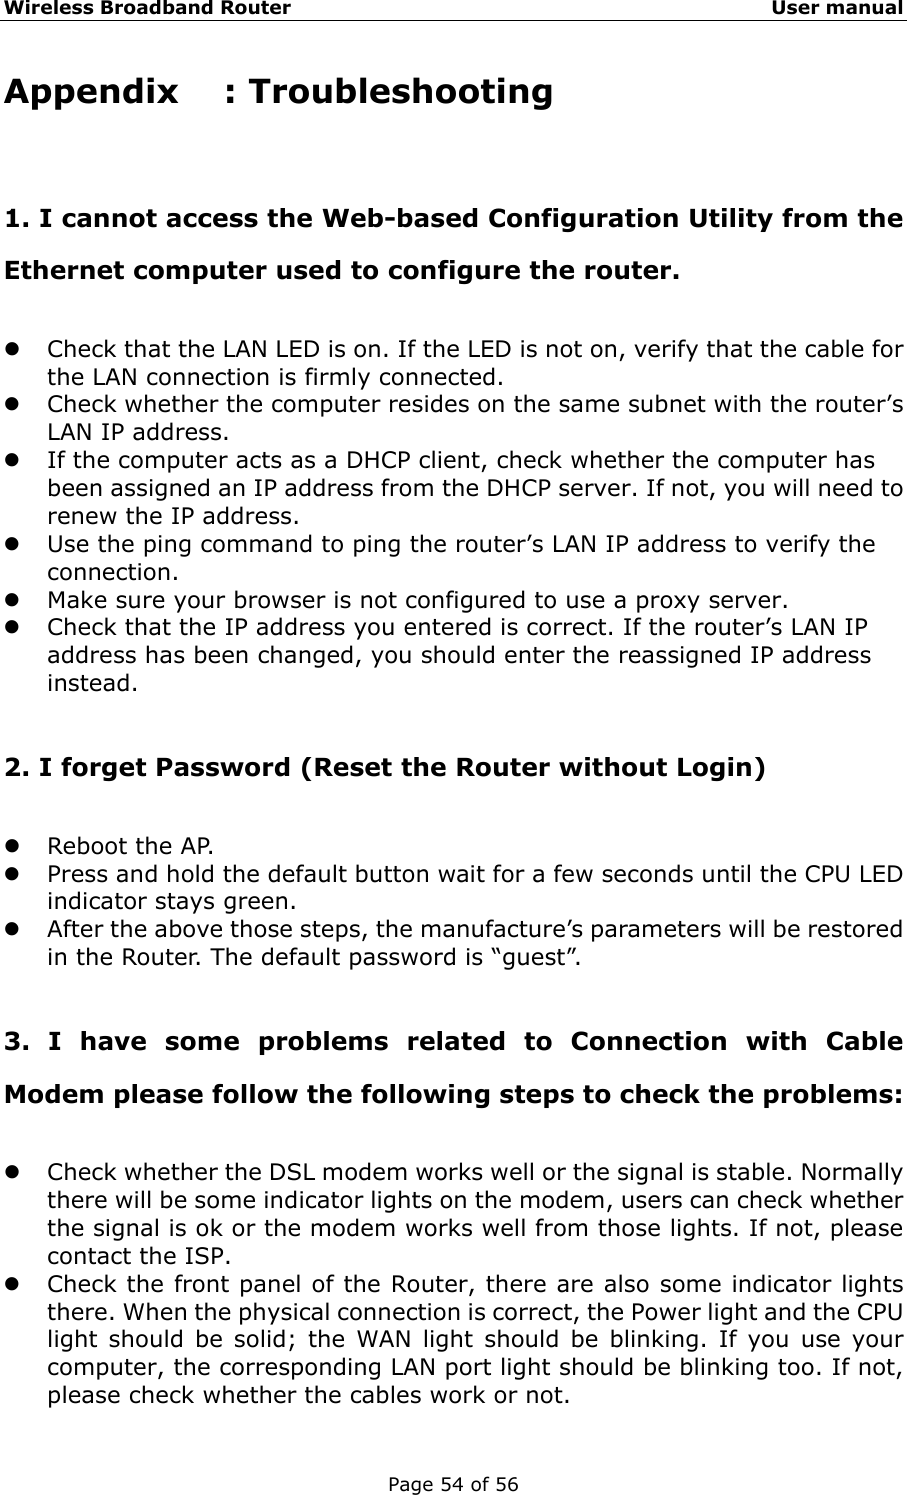 Wireless Broadband Router                                                   User manual Page 54 of 56 Appendix : Troubleshooting 1. I cannot access the Web-based Configuration Utility from the Ethernet computer used to configure the router. z Check that the LAN LED is on. If the LED is not on, verify that the cable for the LAN connection is firmly connected. z Check whether the computer resides on the same subnet with the router’s LAN IP address. z If the computer acts as a DHCP client, check whether the computer has been assigned an IP address from the DHCP server. If not, you will need to renew the IP address.   z Use the ping command to ping the router’s LAN IP address to verify the connection. z Make sure your browser is not configured to use a proxy server. z Check that the IP address you entered is correct. If the router’s LAN IP address has been changed, you should enter the reassigned IP address instead.  2. I forget Password (Reset the Router without Login) z Reboot the AP. z Press and hold the default button wait for a few seconds until the CPU LED indicator stays green. z After the above those steps, the manufacture’s parameters will be restored in the Router. The default password is “guest”.  3. I have some problems related to Connection with Cable Modem please follow the following steps to check the problems: z Check whether the DSL modem works well or the signal is stable. Normally there will be some indicator lights on the modem, users can check whether the signal is ok or the modem works well from those lights. If not, please contact the ISP. z Check the front panel of the Router, there are also some indicator lights there. When the physical connection is correct, the Power light and the CPU light should be solid; the WAN light should be blinking. If you use your computer, the corresponding LAN port light should be blinking too. If not, please check whether the cables work or not.   